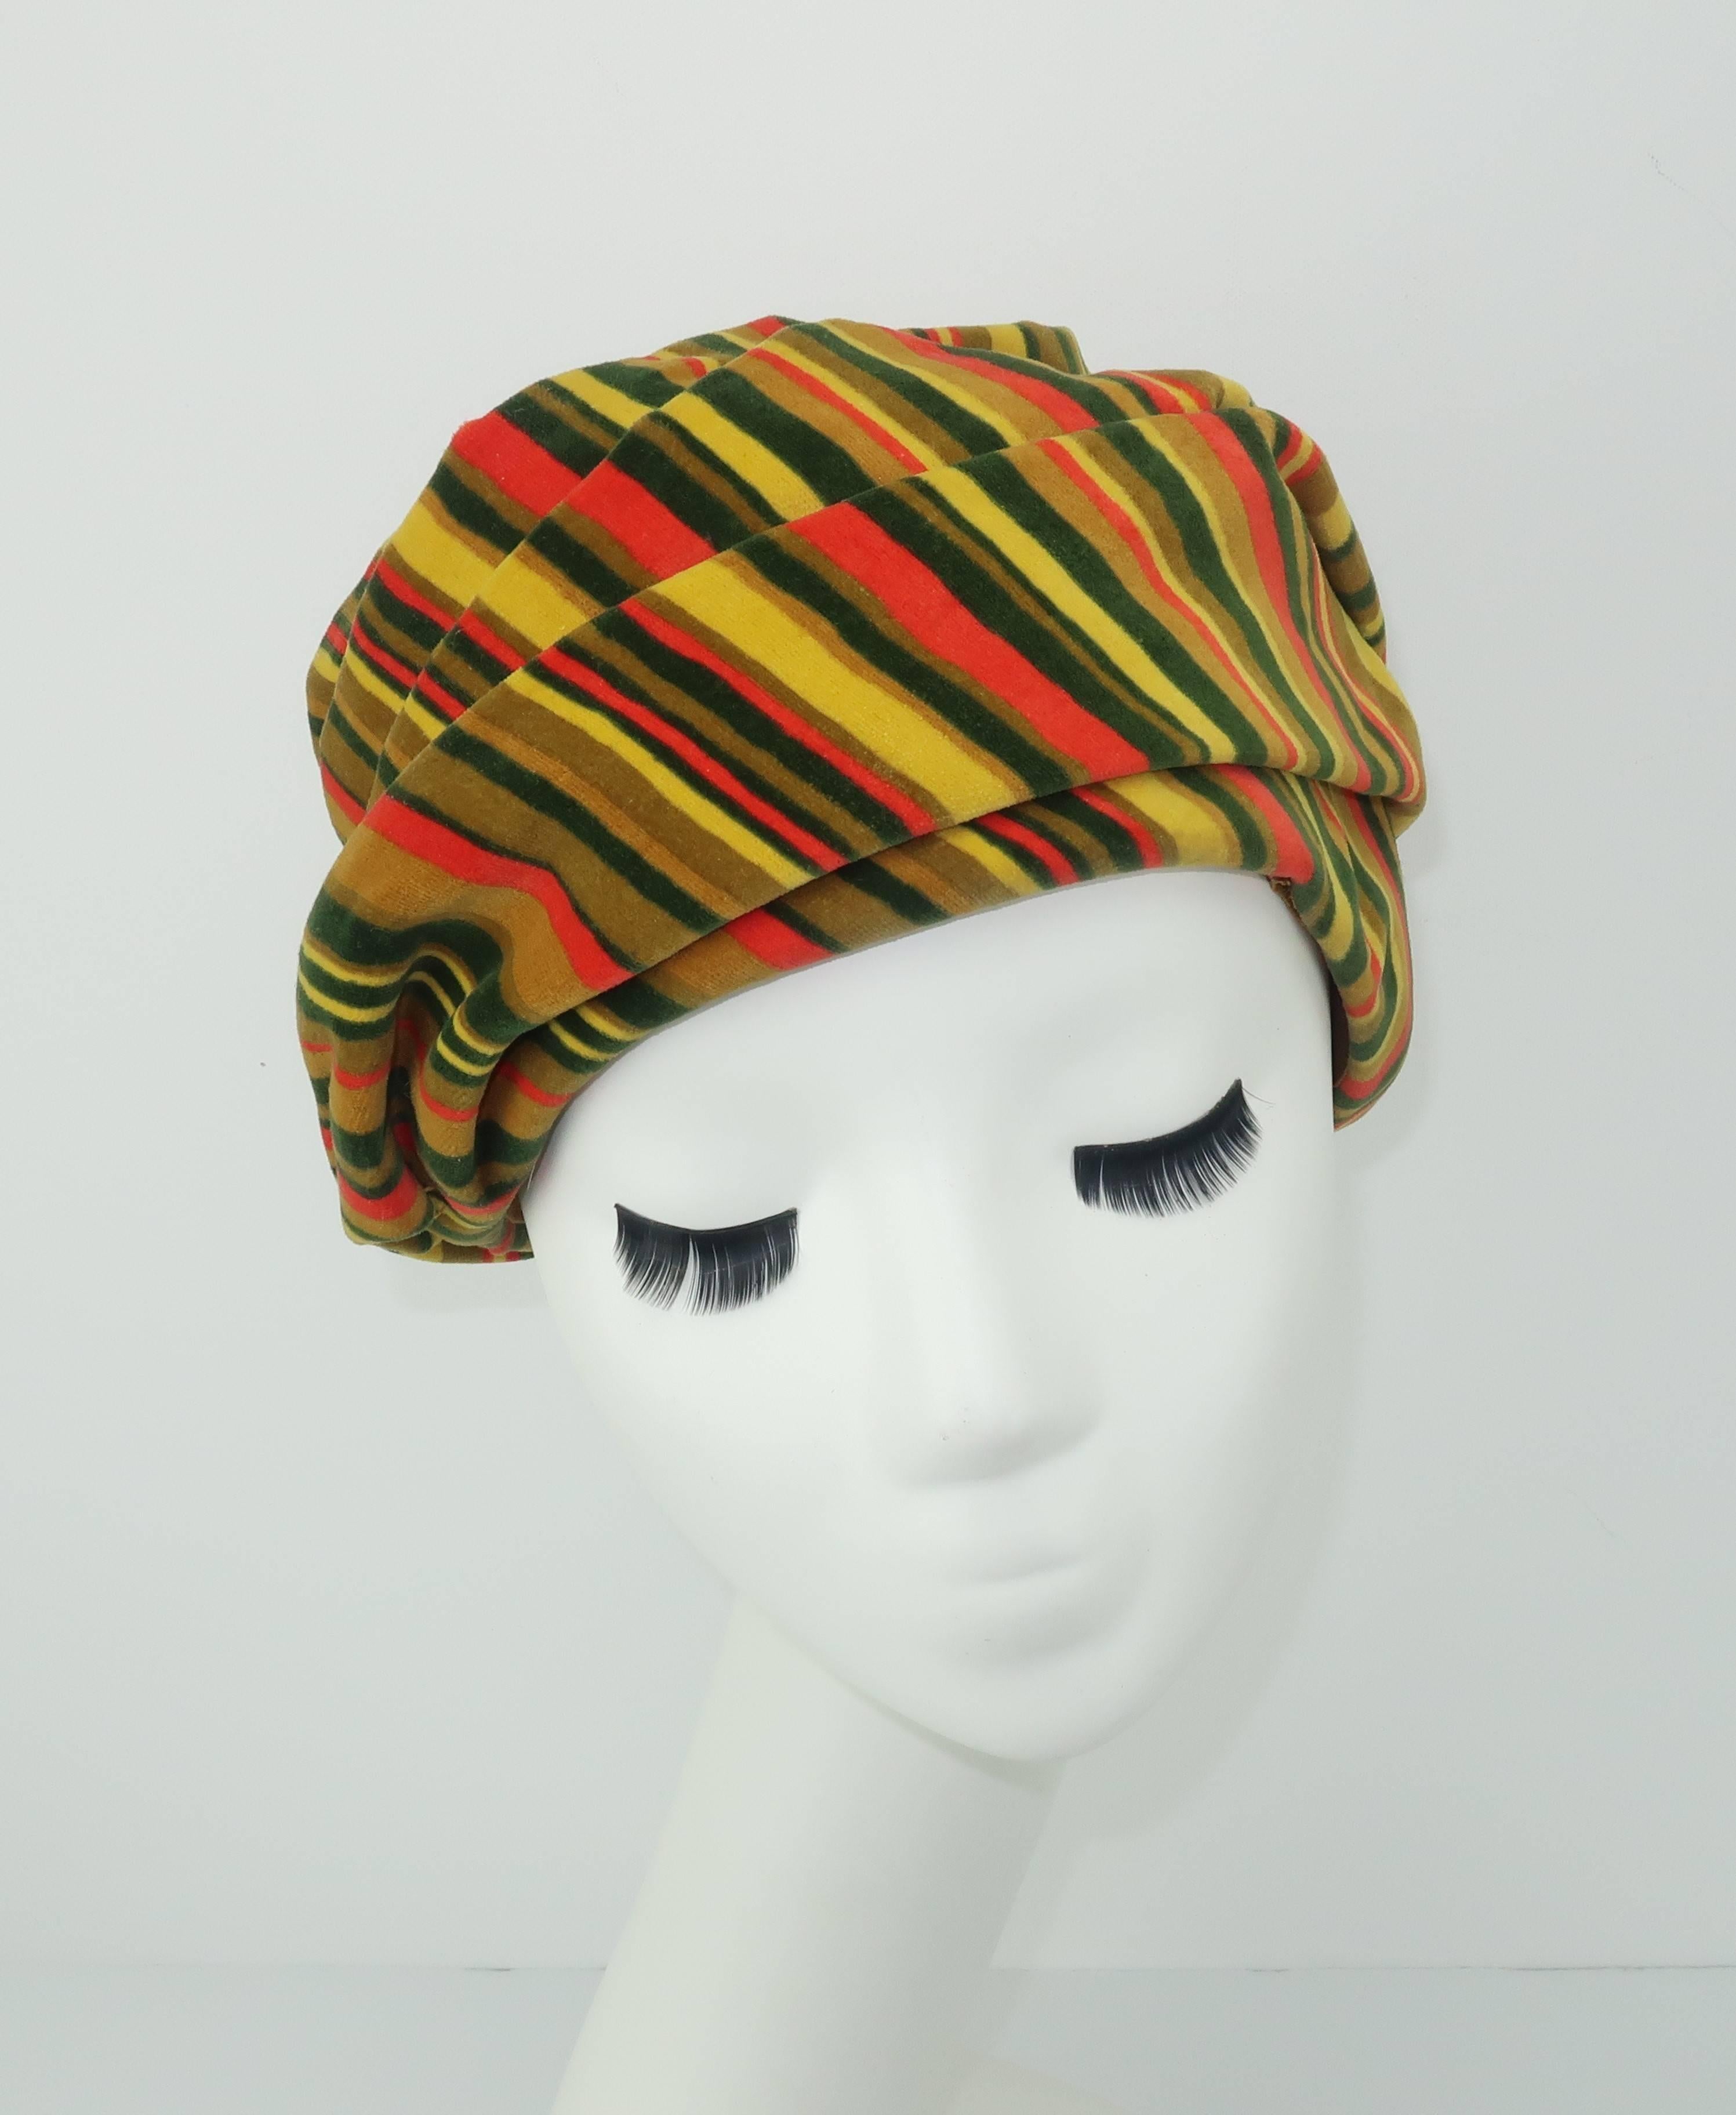 This C.1960 hat by Ken Blair is fabricated from a lush striped velvet in shades of green, yellow and orange.  It is a turban style silhouette expertly folded and stitched into an exotic swirl that is most evident at the crown which takes on the look